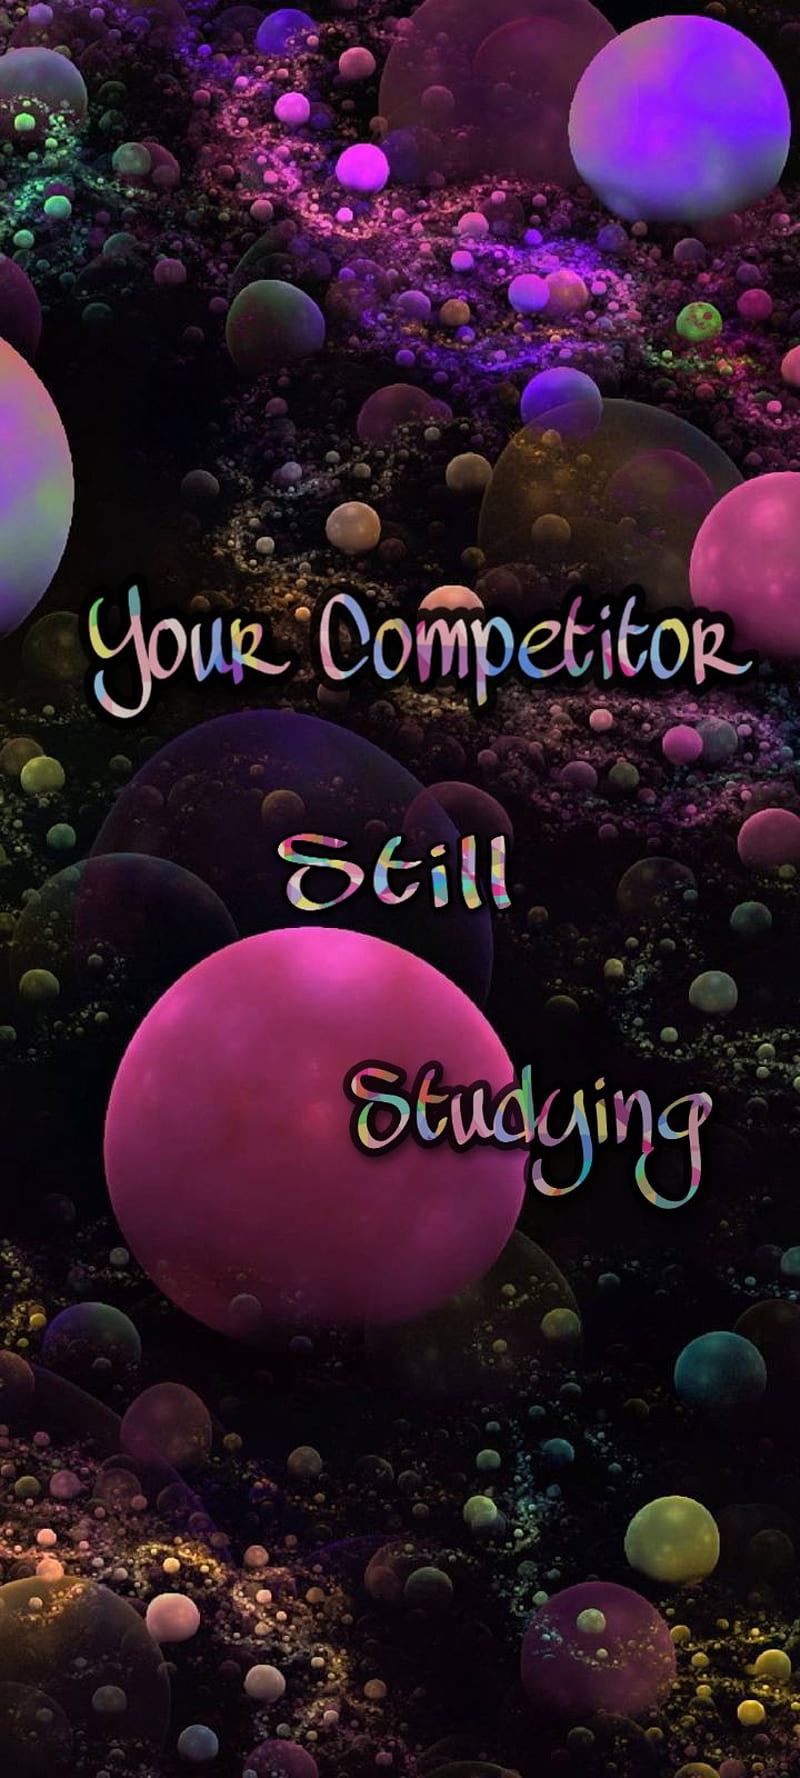 Studies, competition, students, universe, HD phone wallpaper | Peakpx